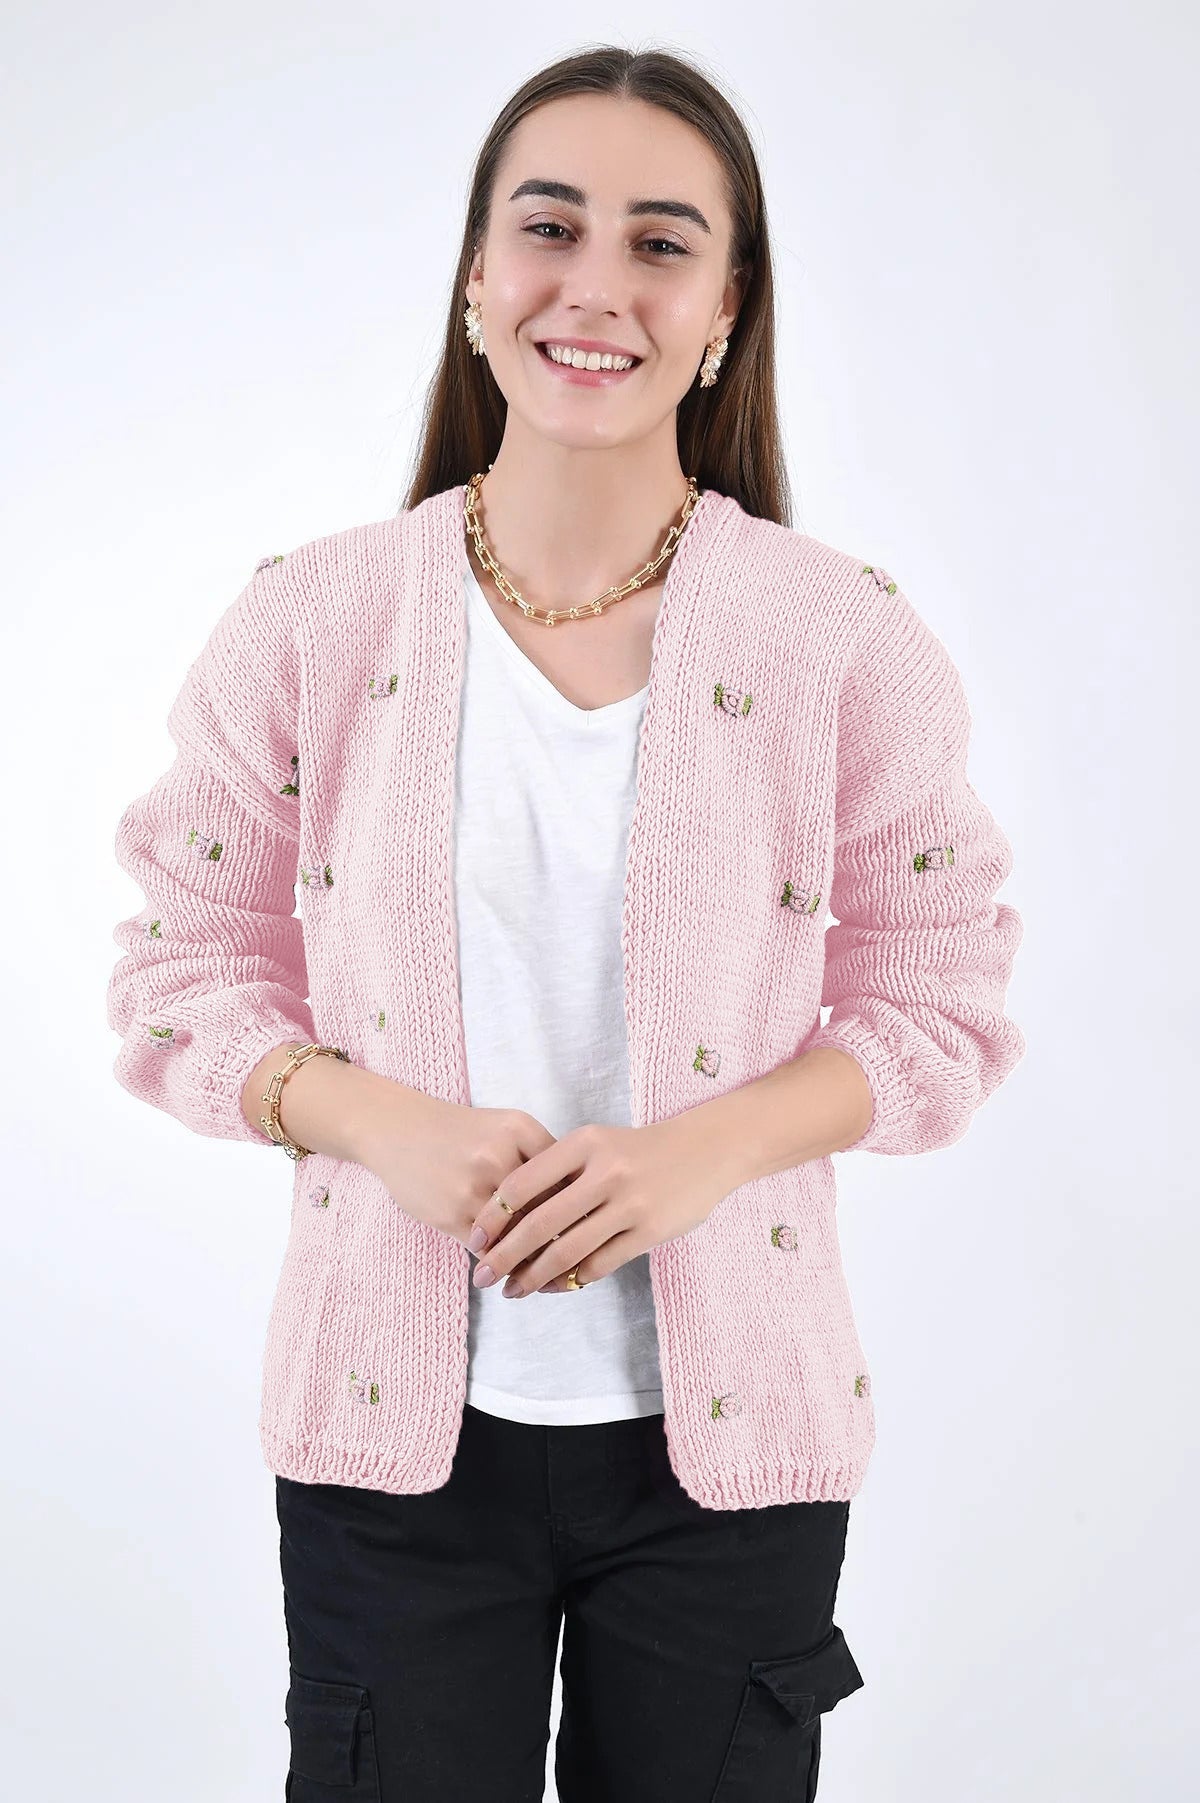 WINTER BLOOM PINK ROSE Cotton Cardigan by Fanm Mon